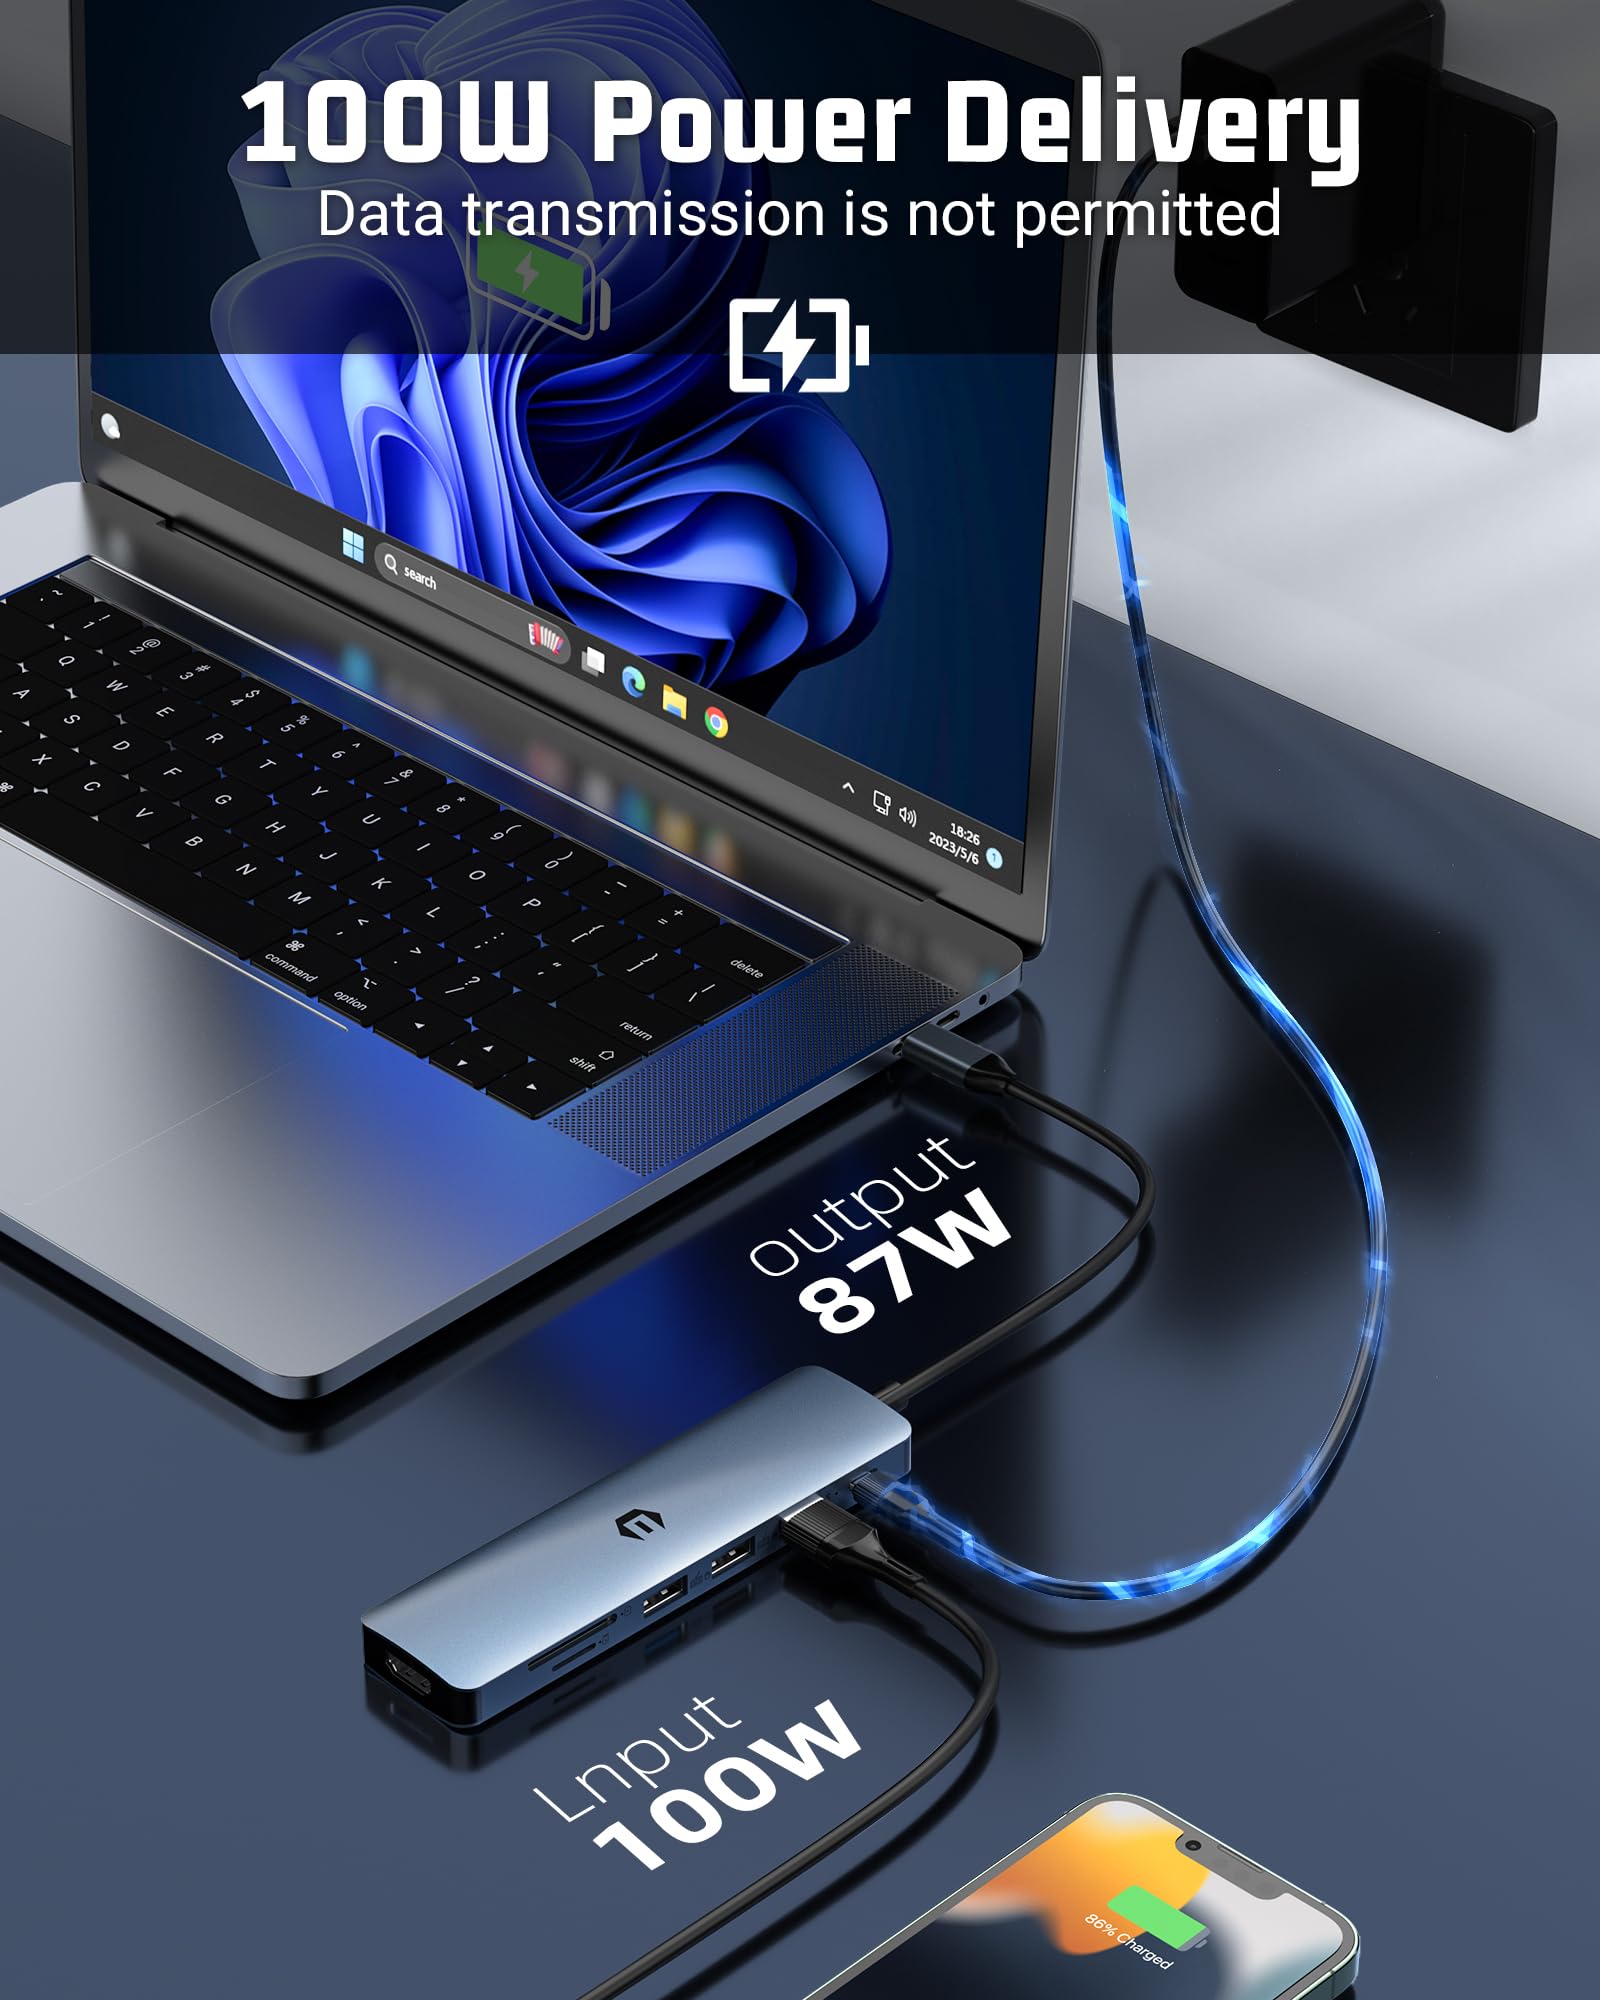 7 in 1 USB C Hub, oditton USB Adapter, 5 Gbps Data Transfer, a 7 in 1 hub Featuring 4K HDMI, 100W PD, USB 3.0 Ports, 2 x USB 2.0 Ports and an SD/TF Card Reader